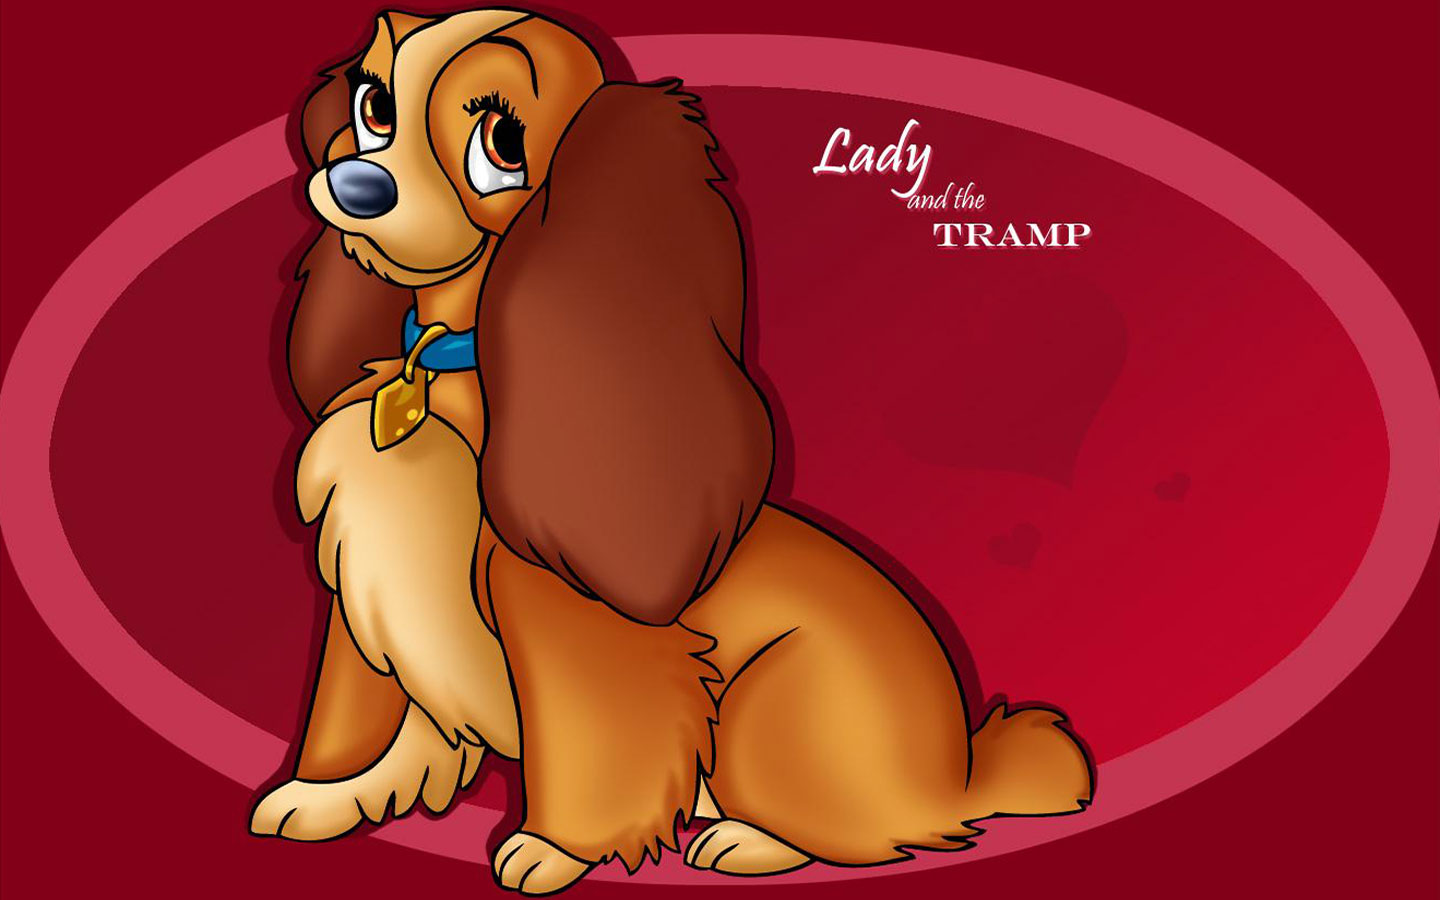 movie, lady and the tramp (1955), lady (lady and the tramp), lady and the tramp